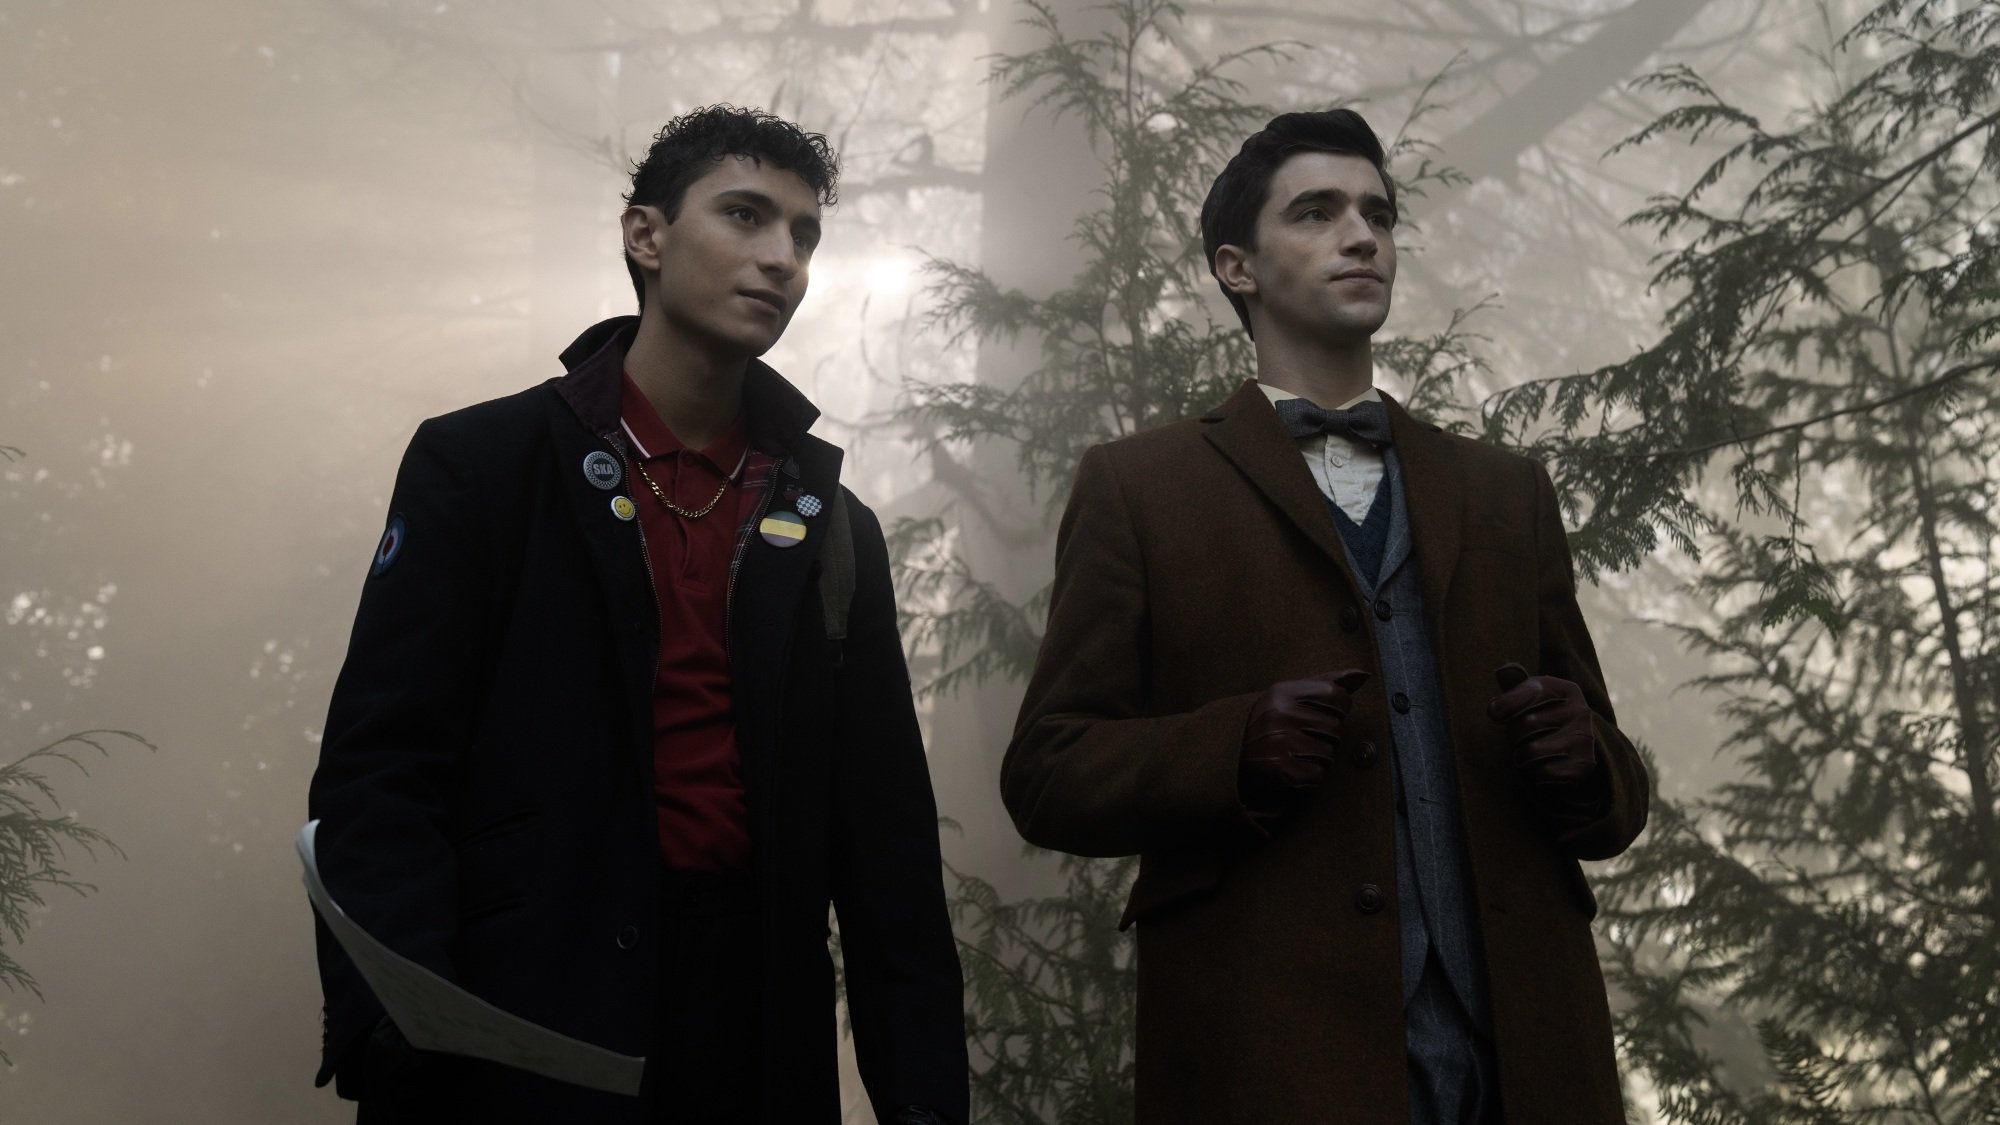 Two young men in long overcoats in the forest.